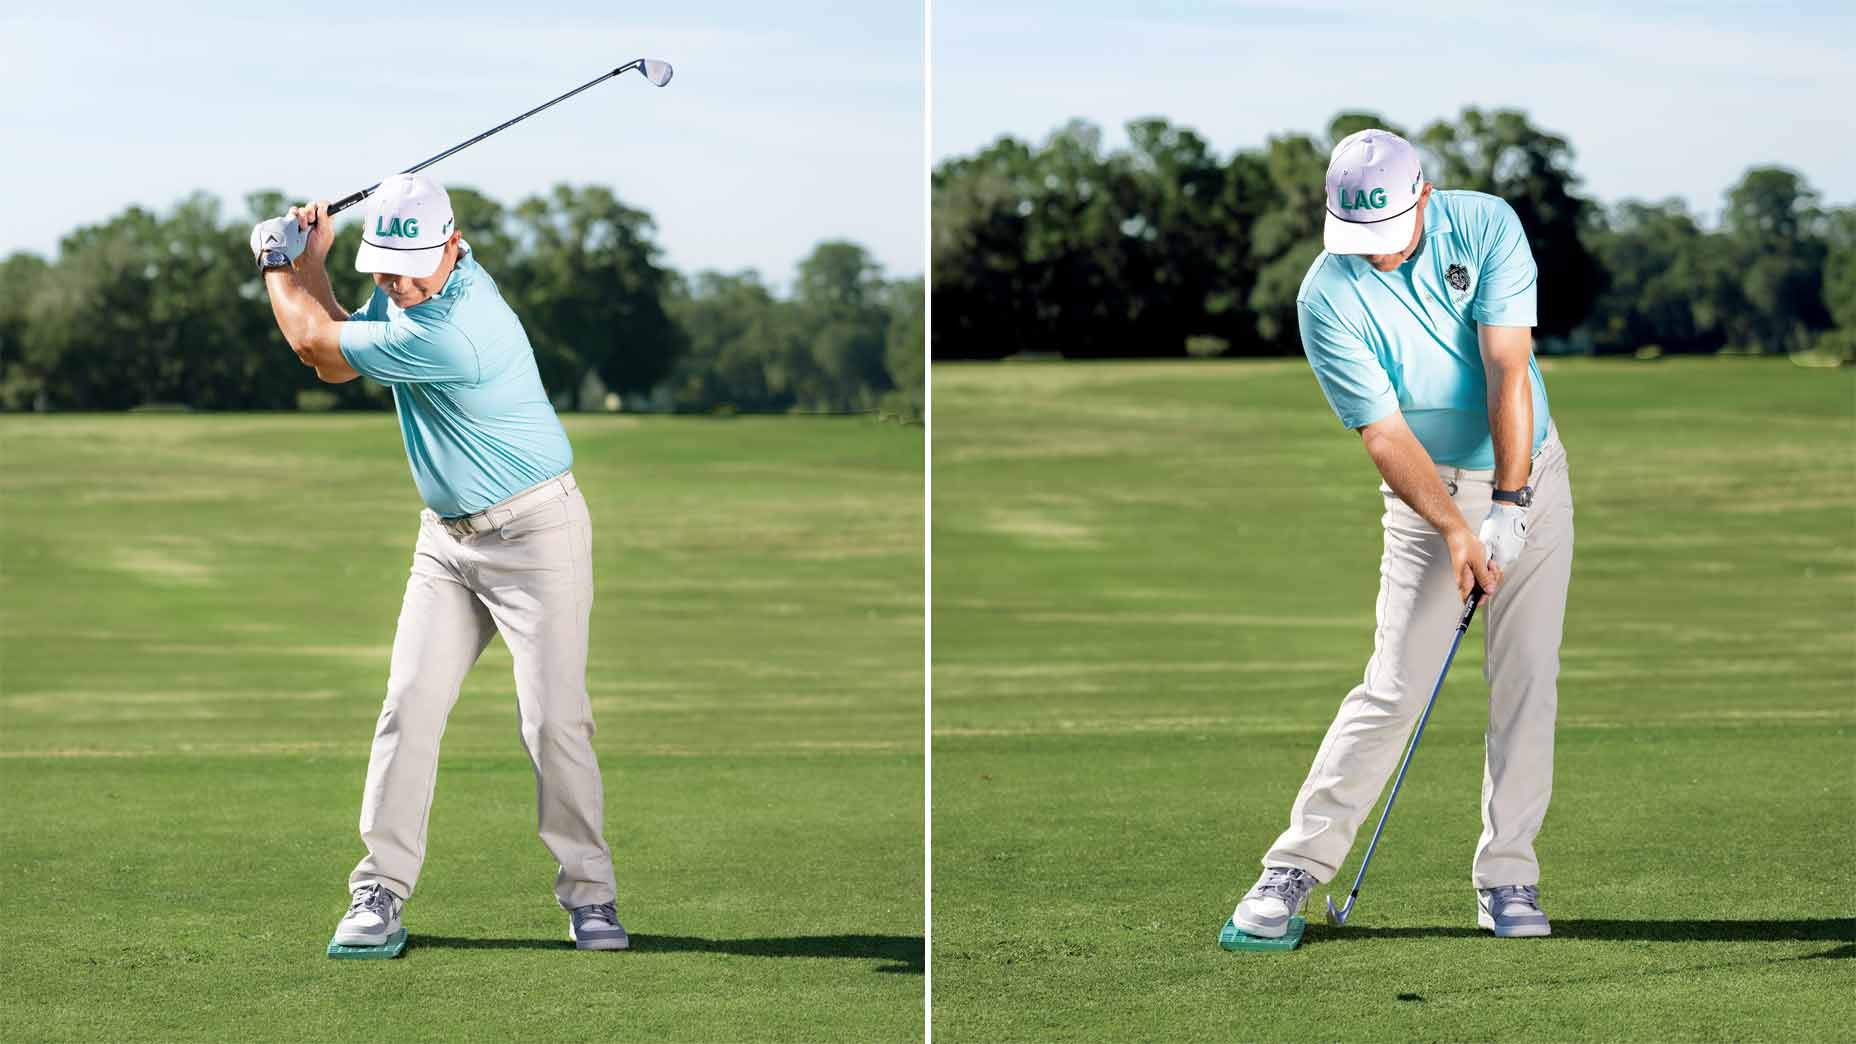 mike dickson demonstrates how to properly load in the backswing